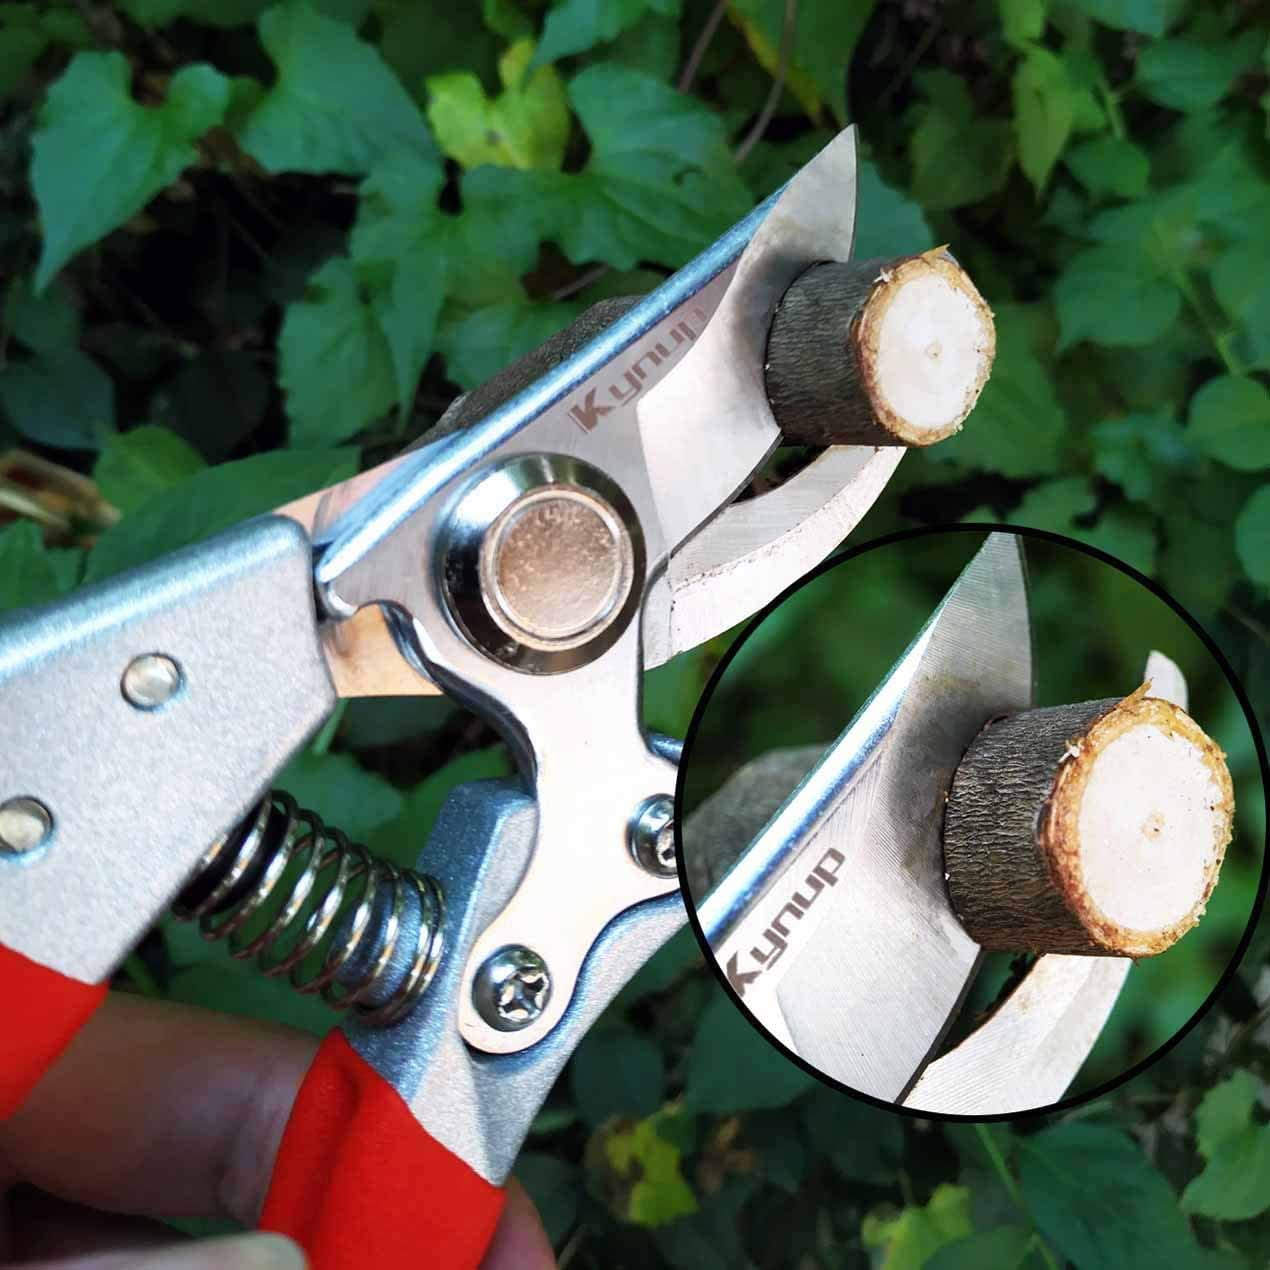  Bypass Pruning Shears - Solid Wood Handle Garden Shears- 8-inch  Built-in Spring Tree Trimmers - Garden Shears Suitable For Small Hands -  Ergonomic Gardening Tools - Profession Gardener's Gift : Patio